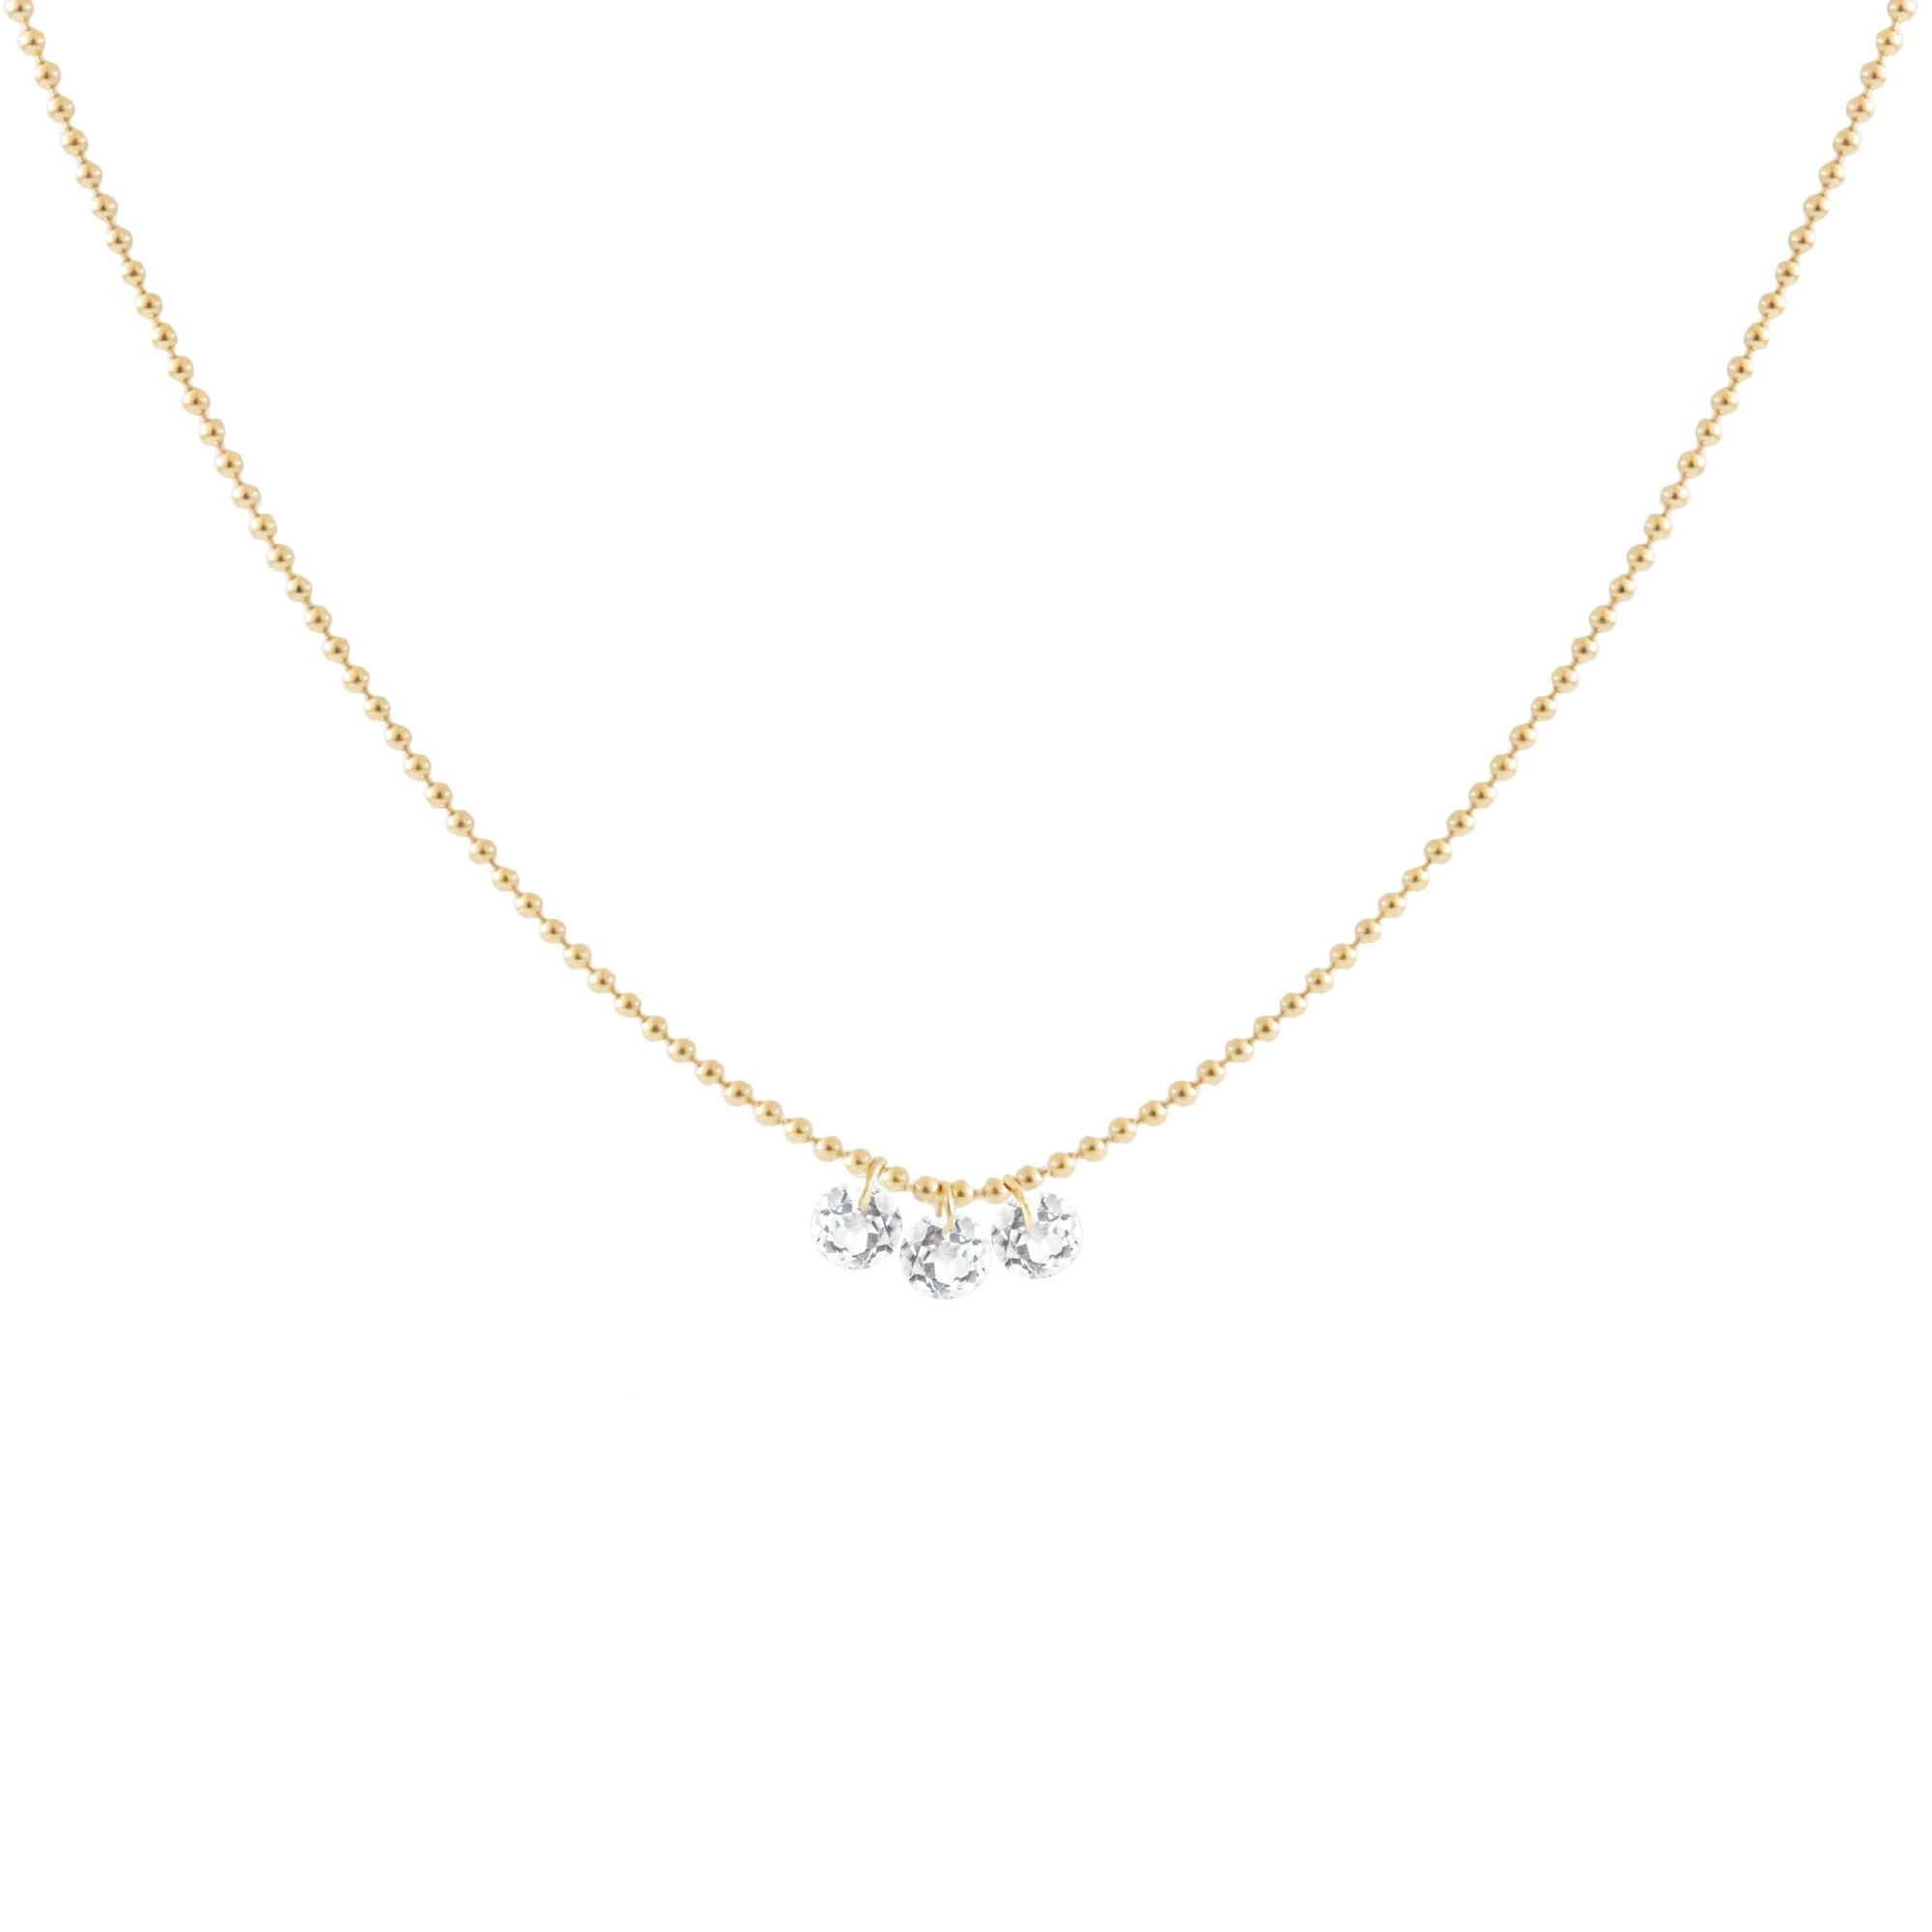 DAINTY RADIANT TRIO NECKLACE - CUBIC ZIRCONIA & GOLD - SO PRETTY CARA COTTER